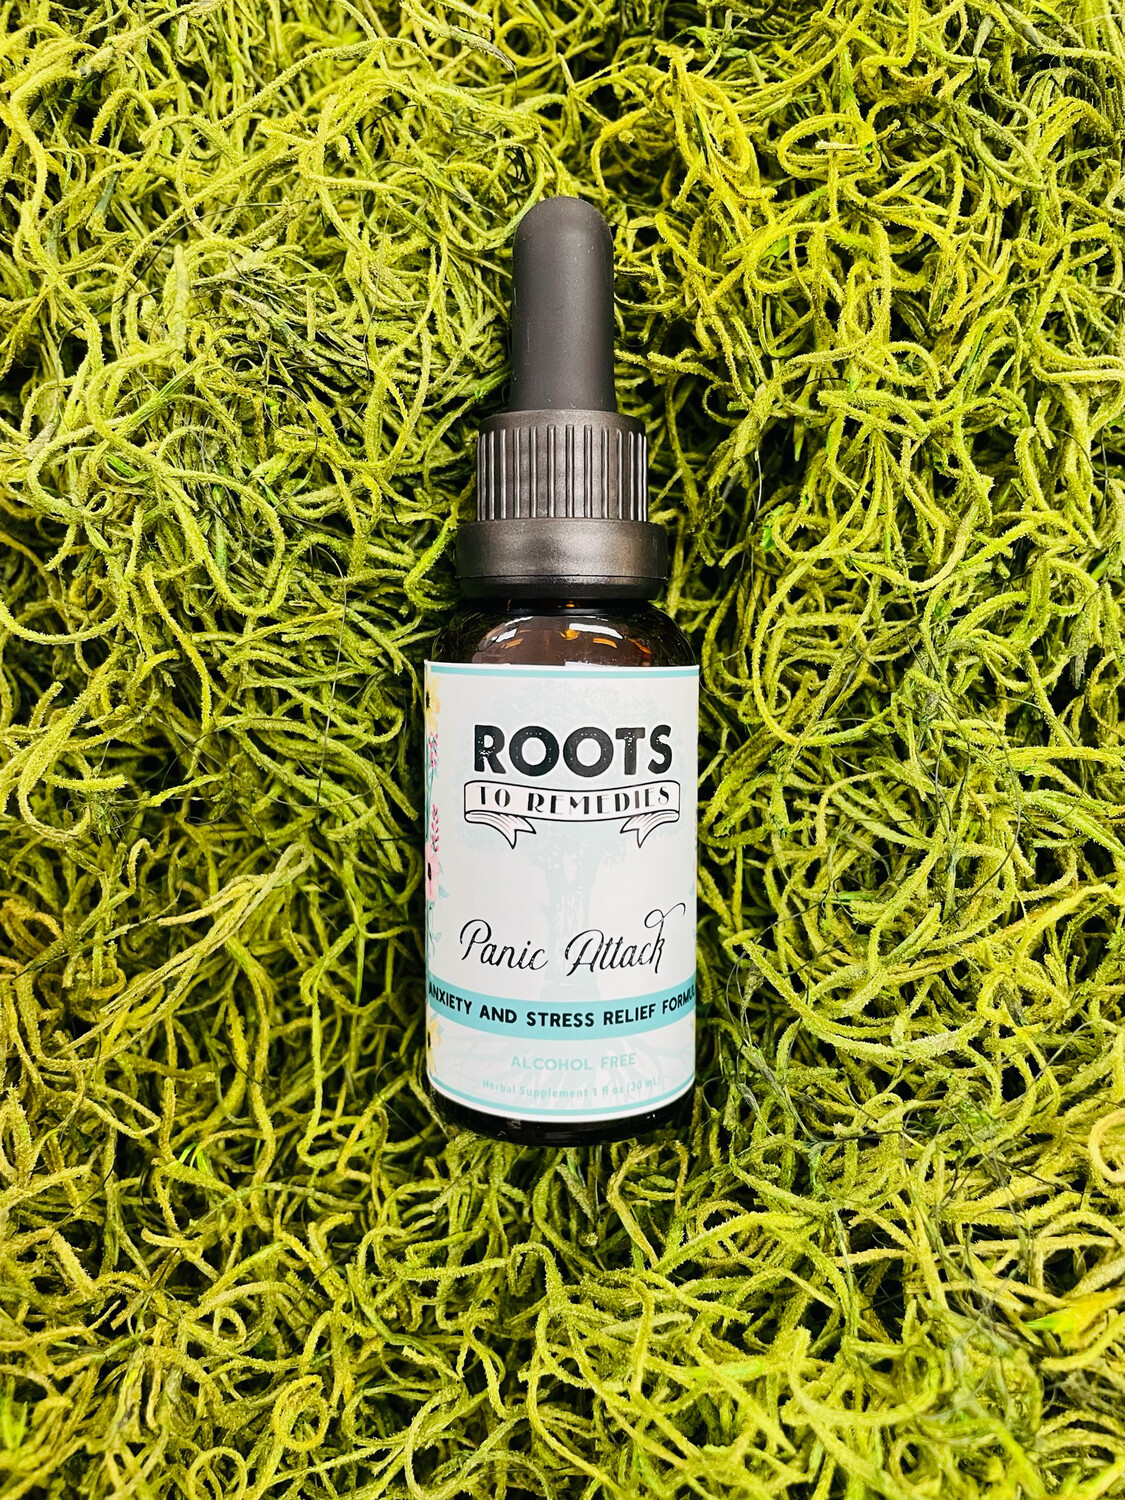 Roots To Remedies Panic Attack Anxiety And Stress Relief Formula Drops